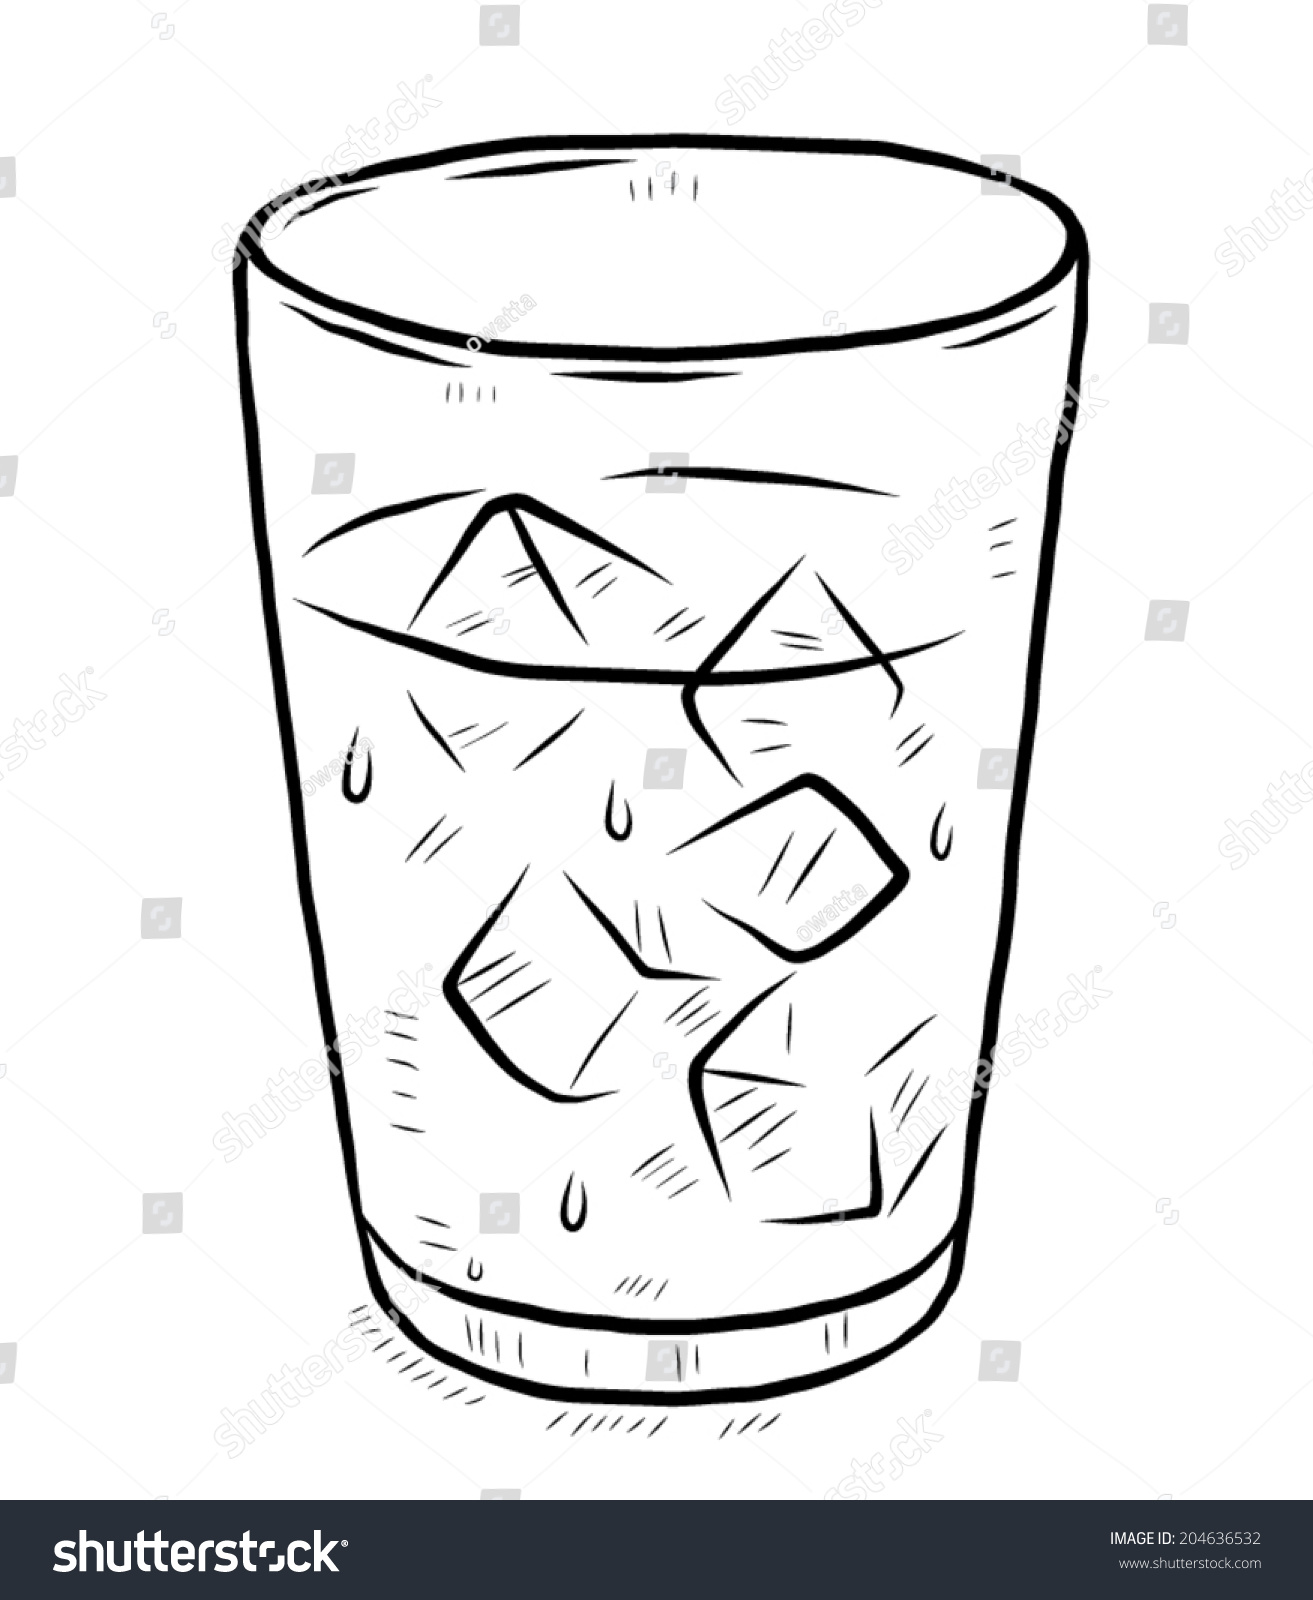 clipart glass of ice - photo #46